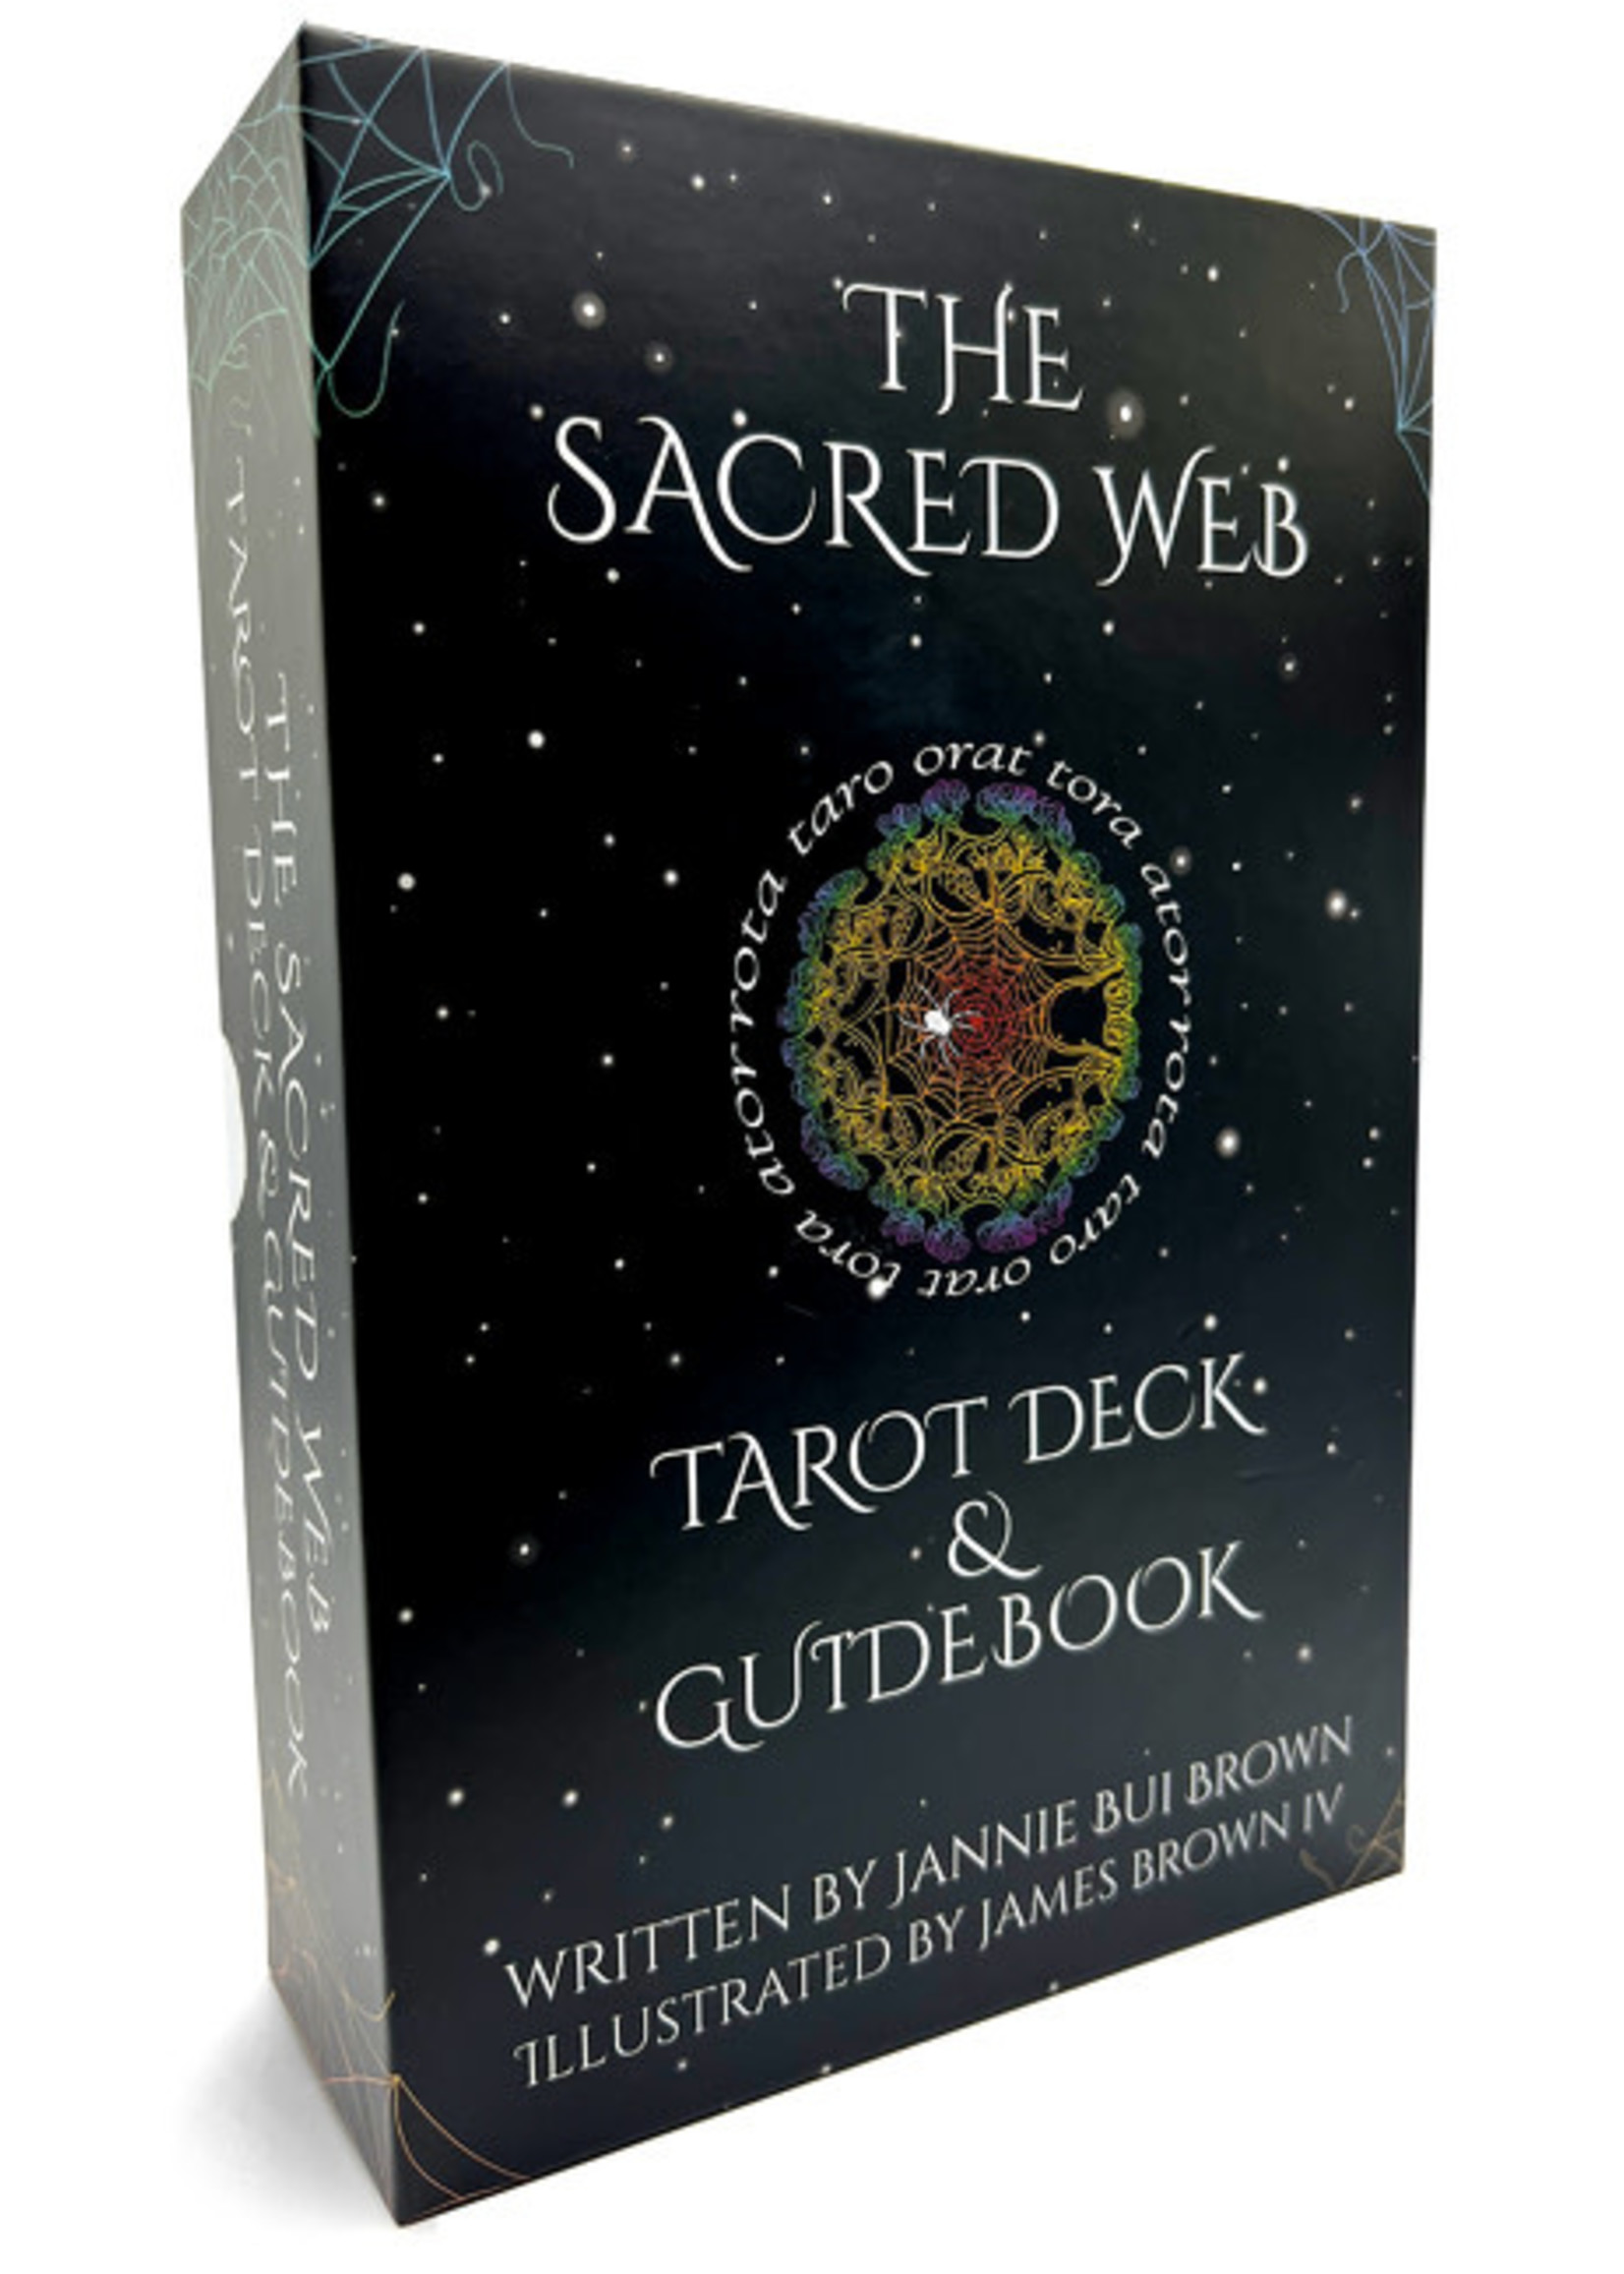 The Sacred Web Tarot by Jannie Bui Brown, James W. Brown